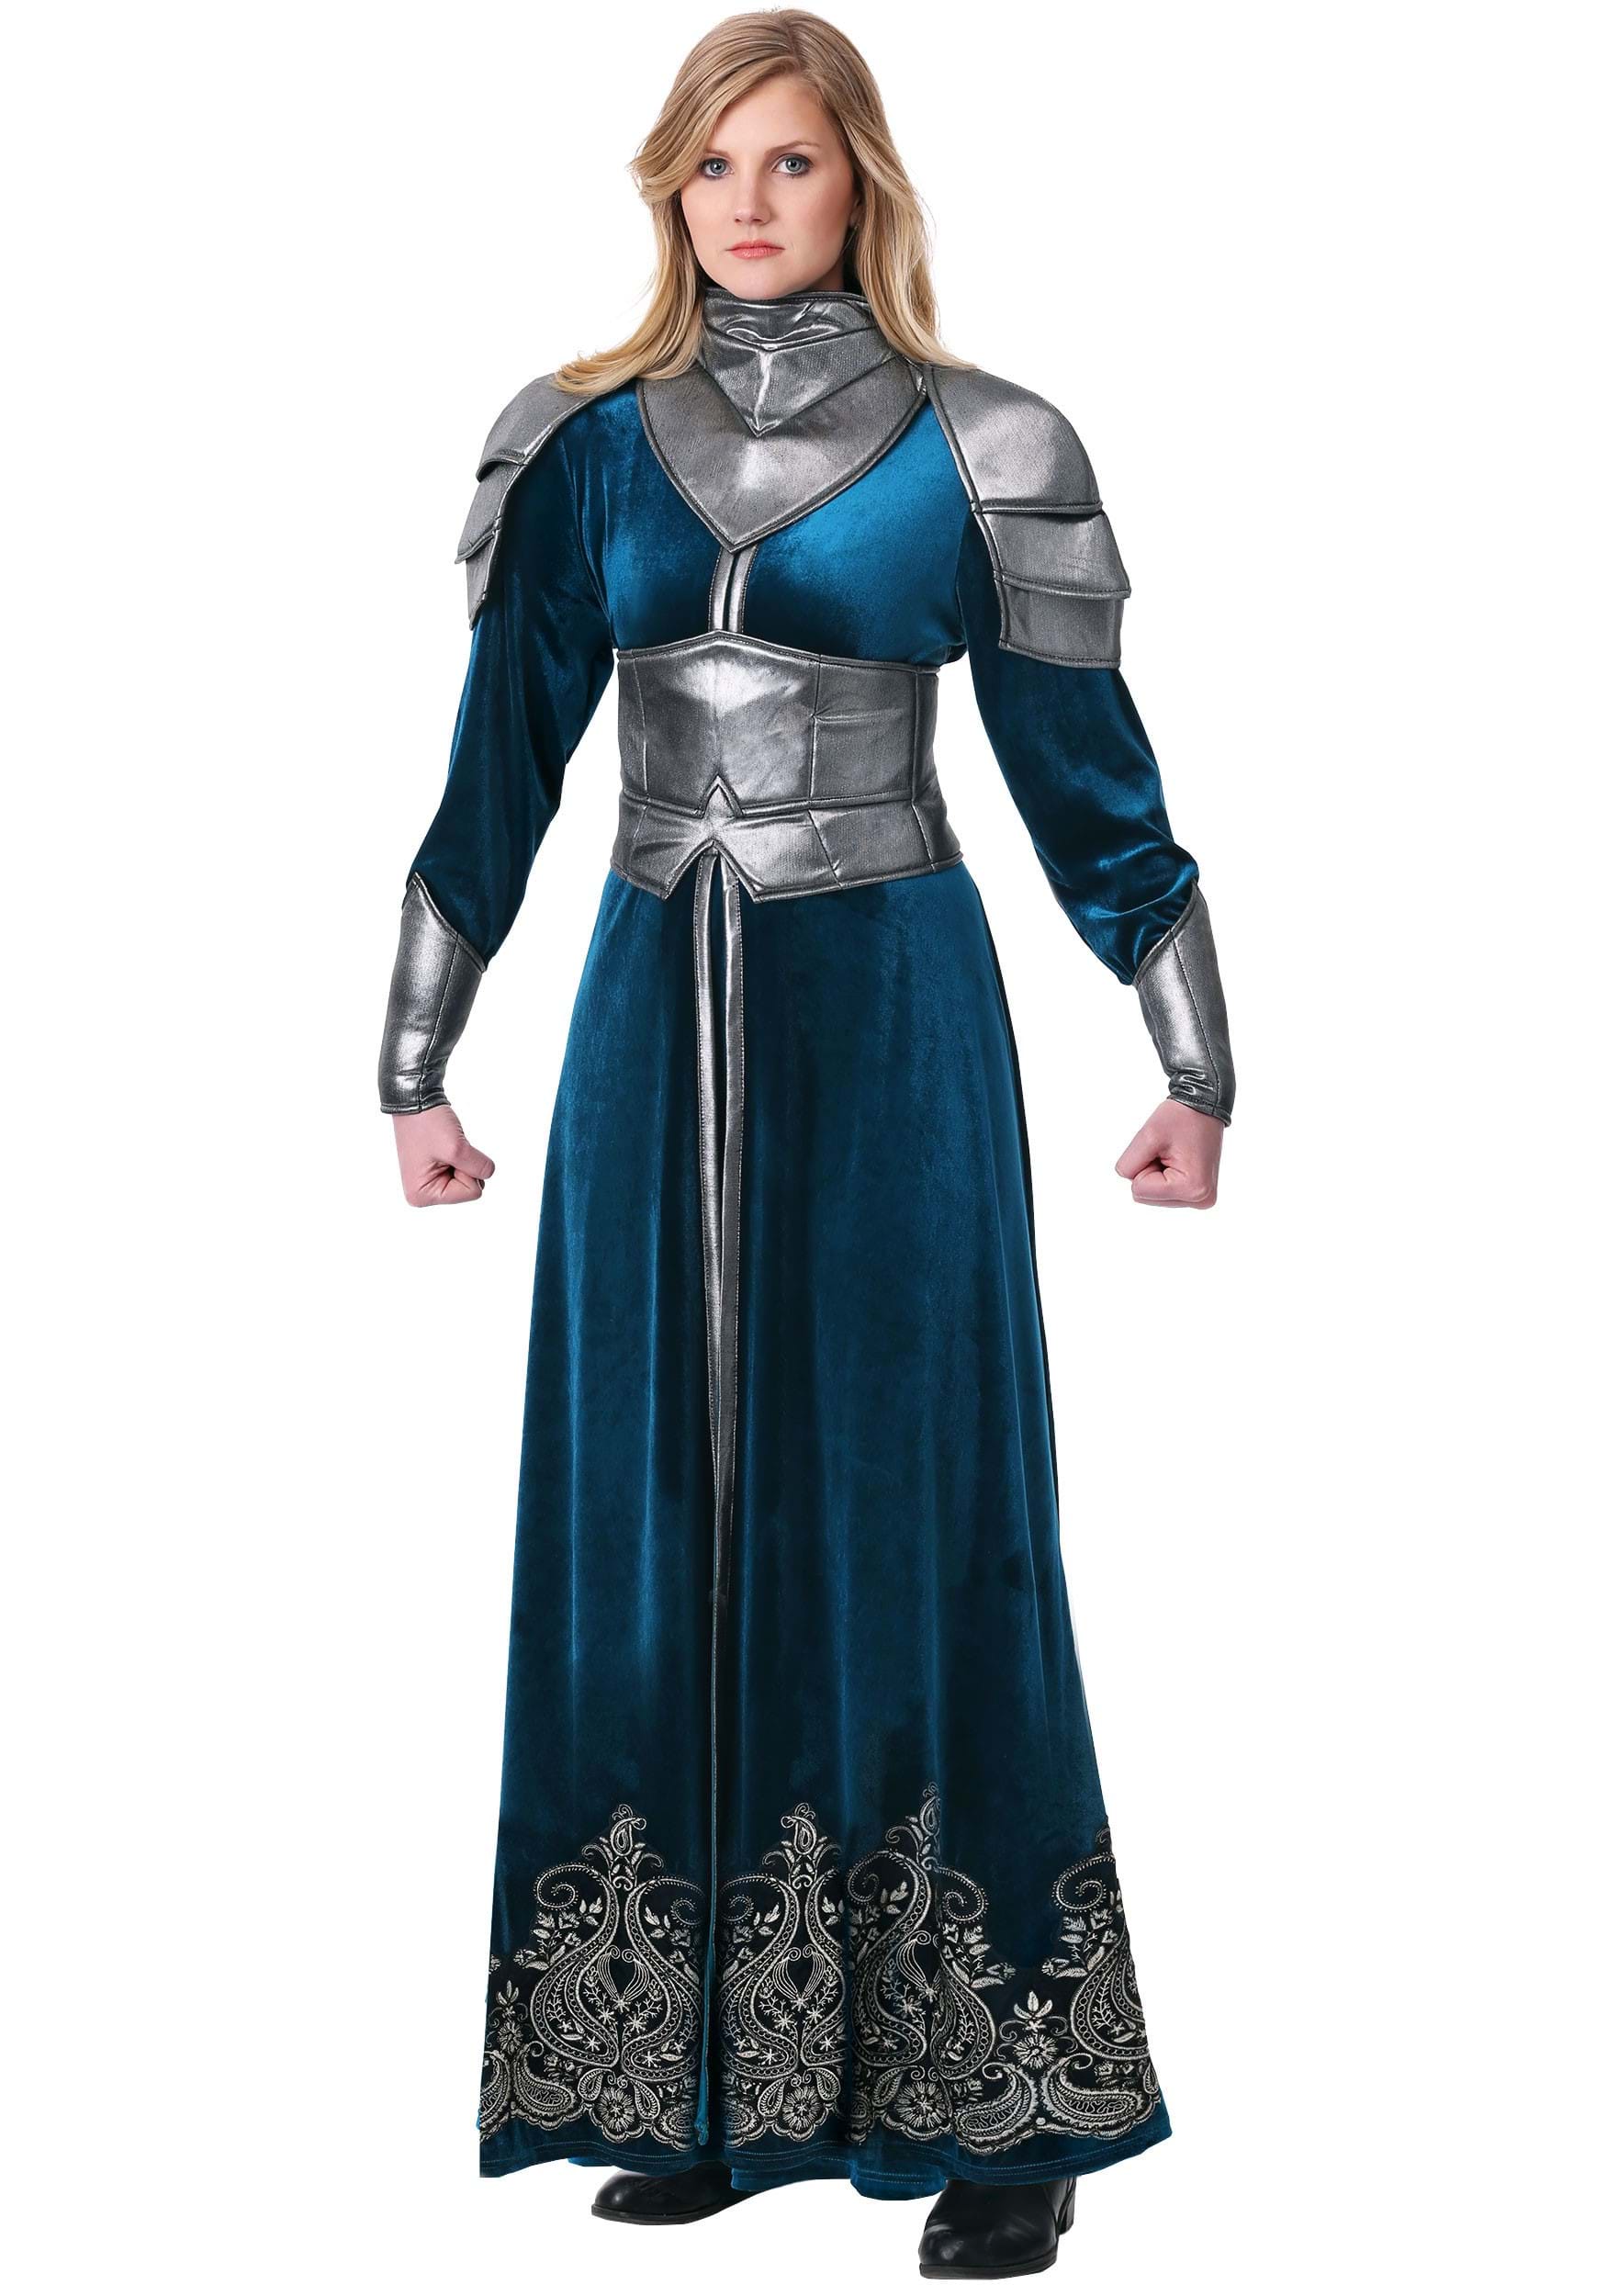 Image of Medieval Warrior Costume for Women ID FUN0409AD-M